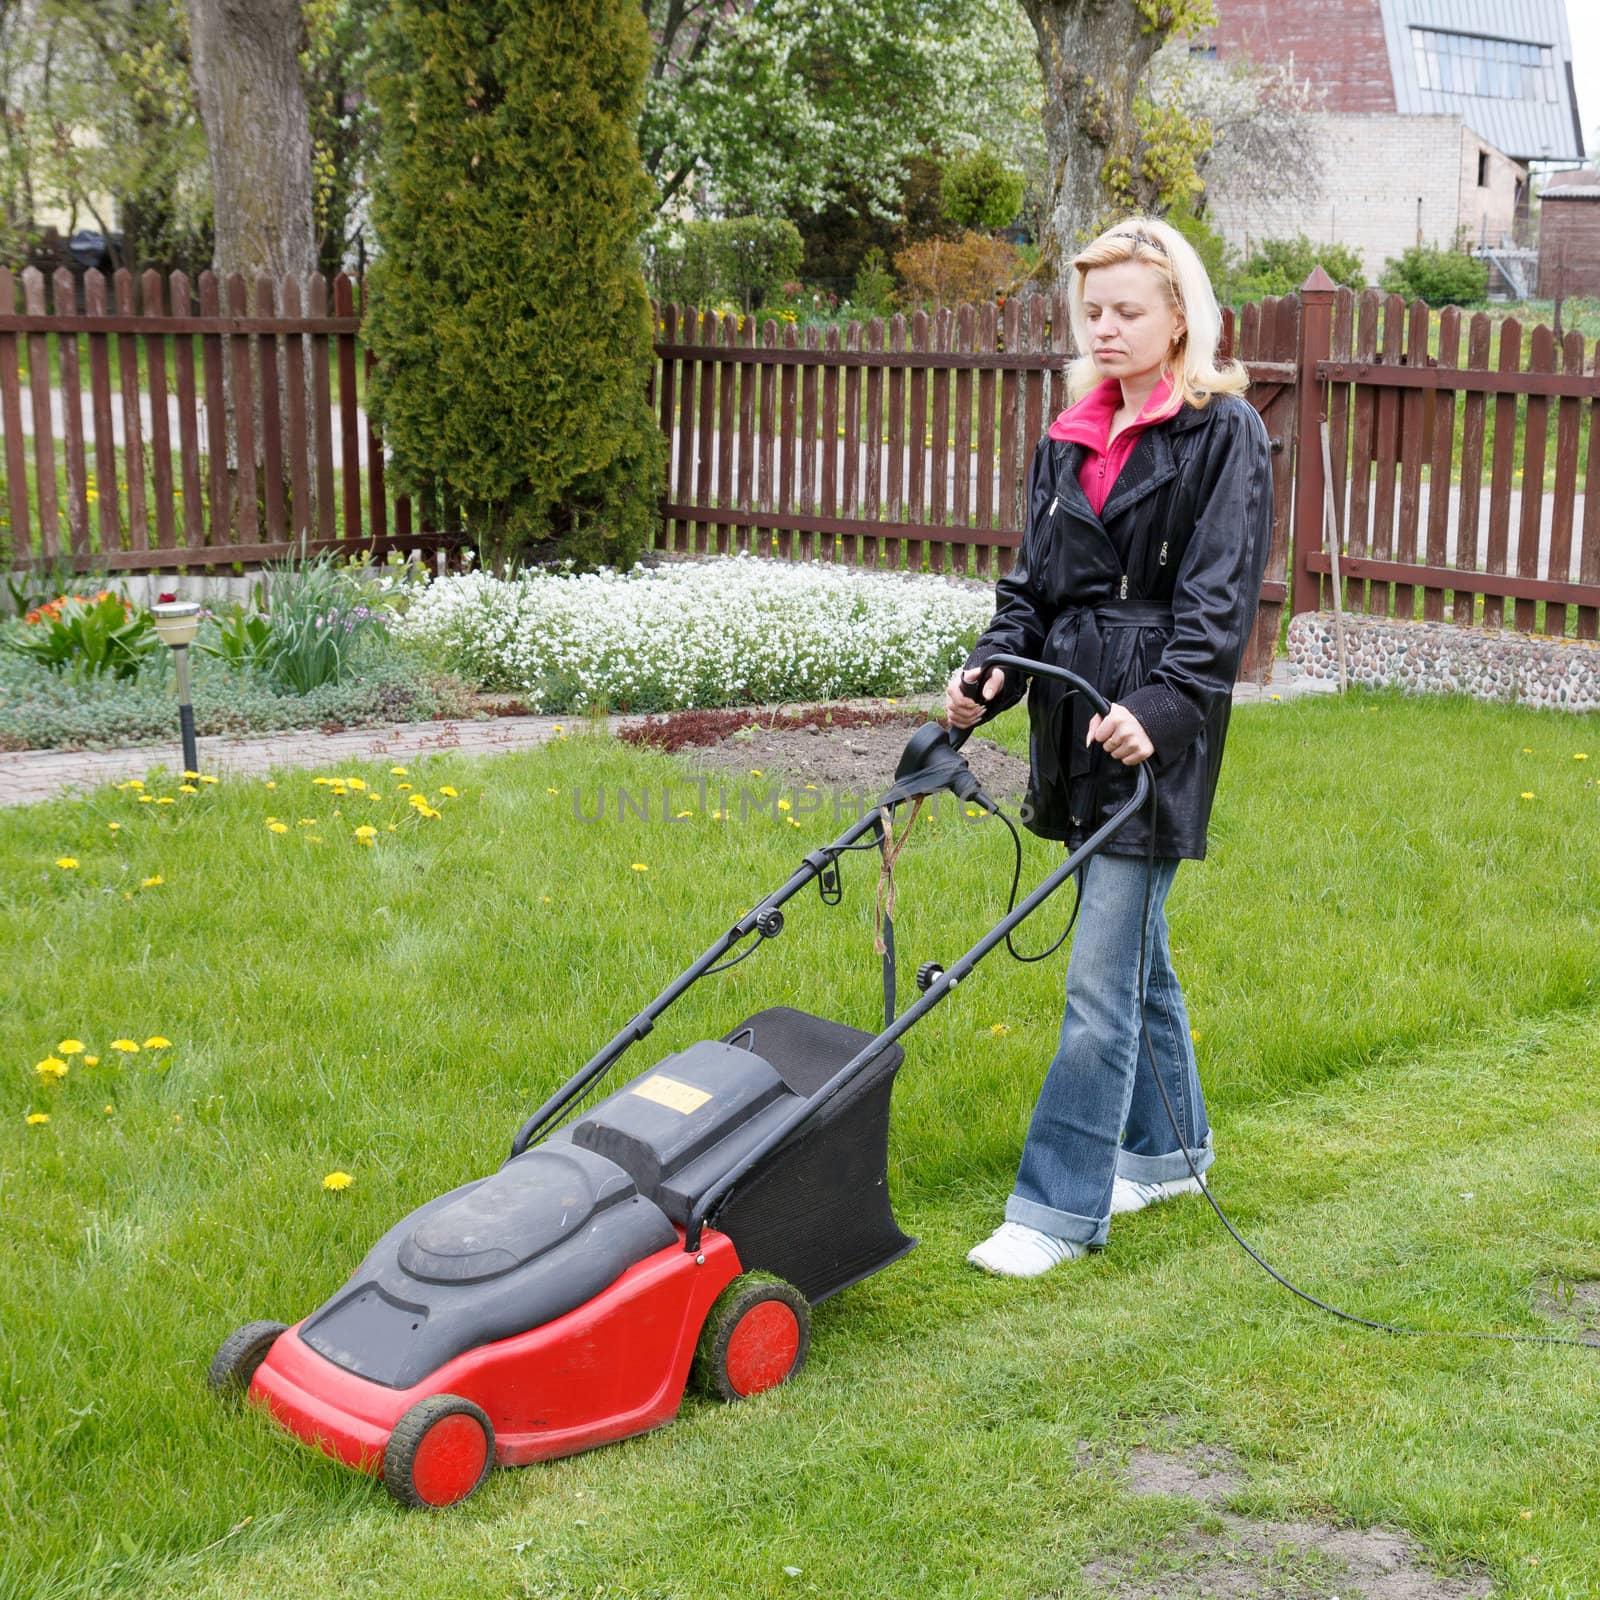 woman mowing grass with an electric lawn mower